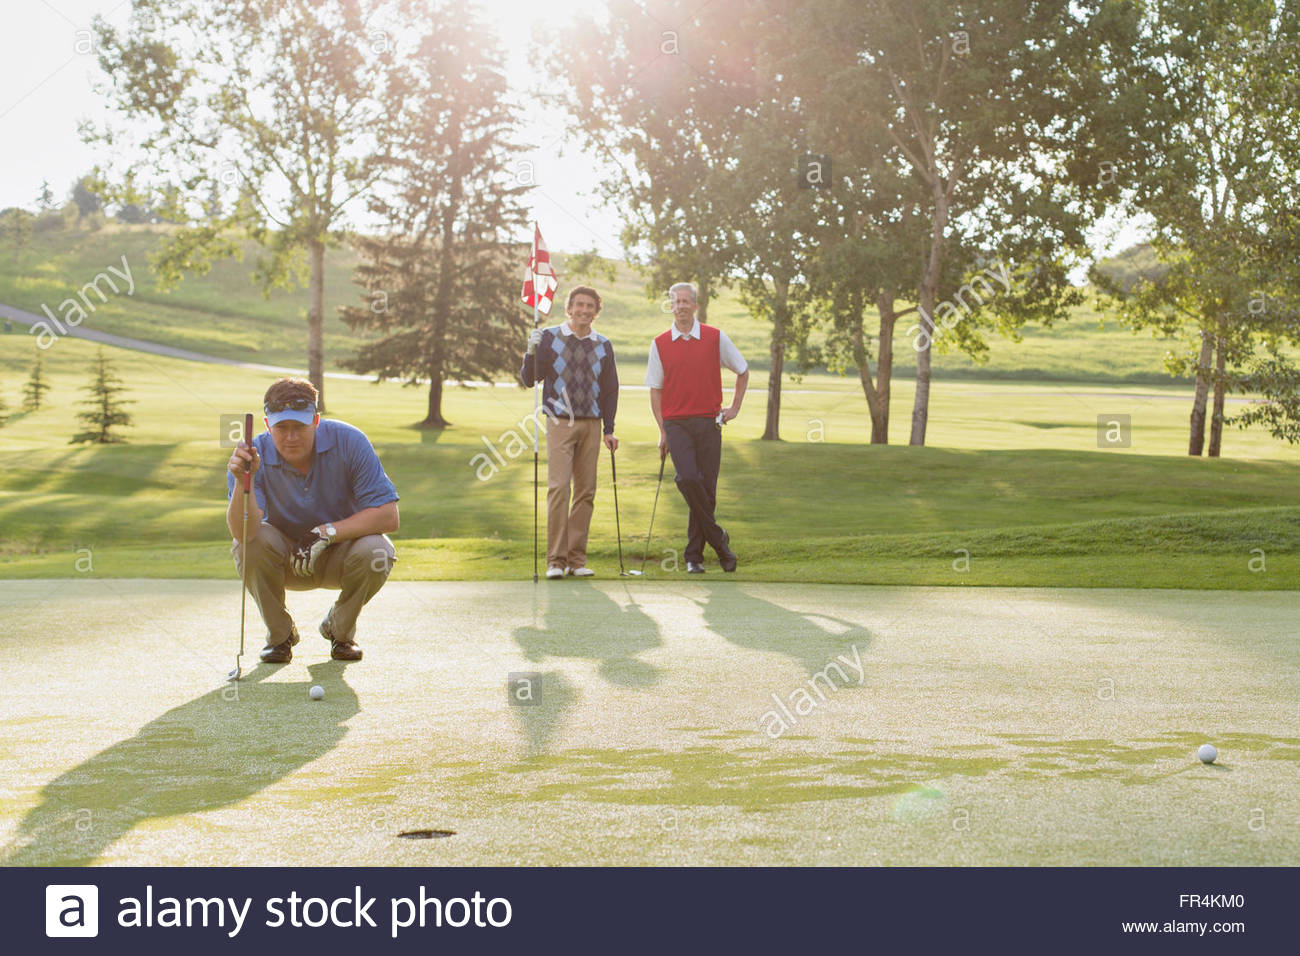 golfer focussed on putt while friends watch Stock Photo